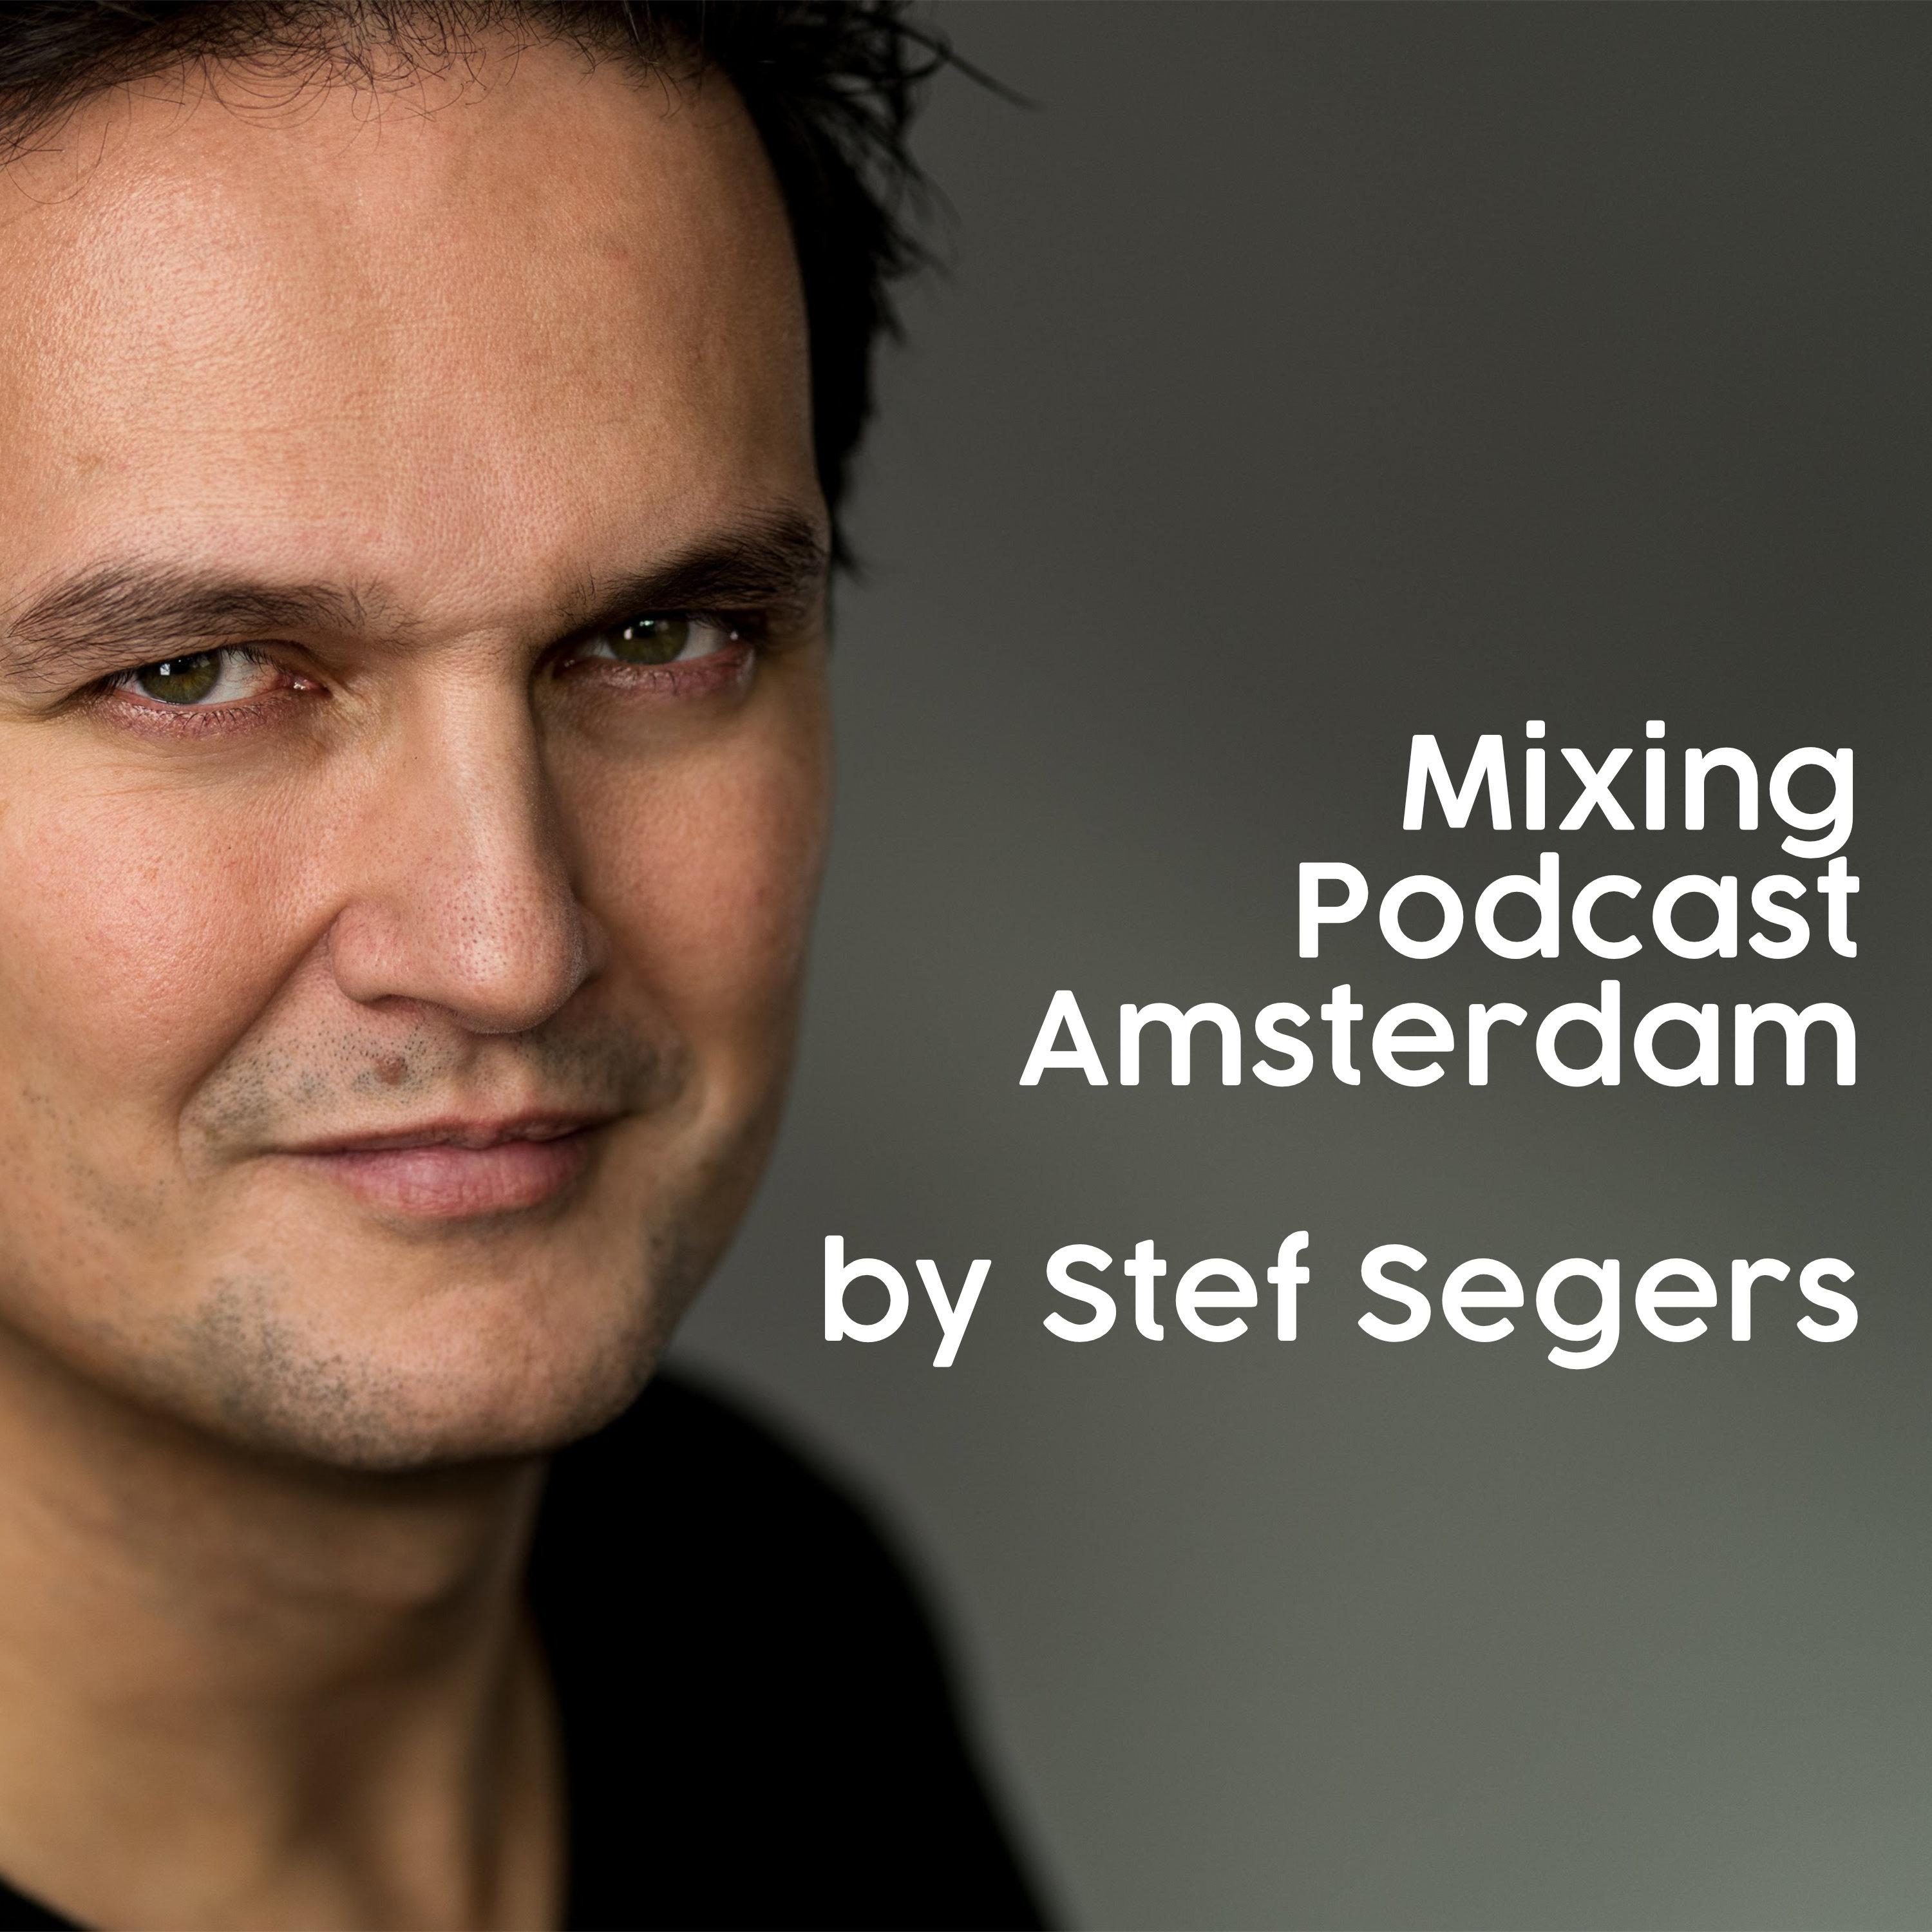 Mixing Podcast Amsterdam by Stef Segers